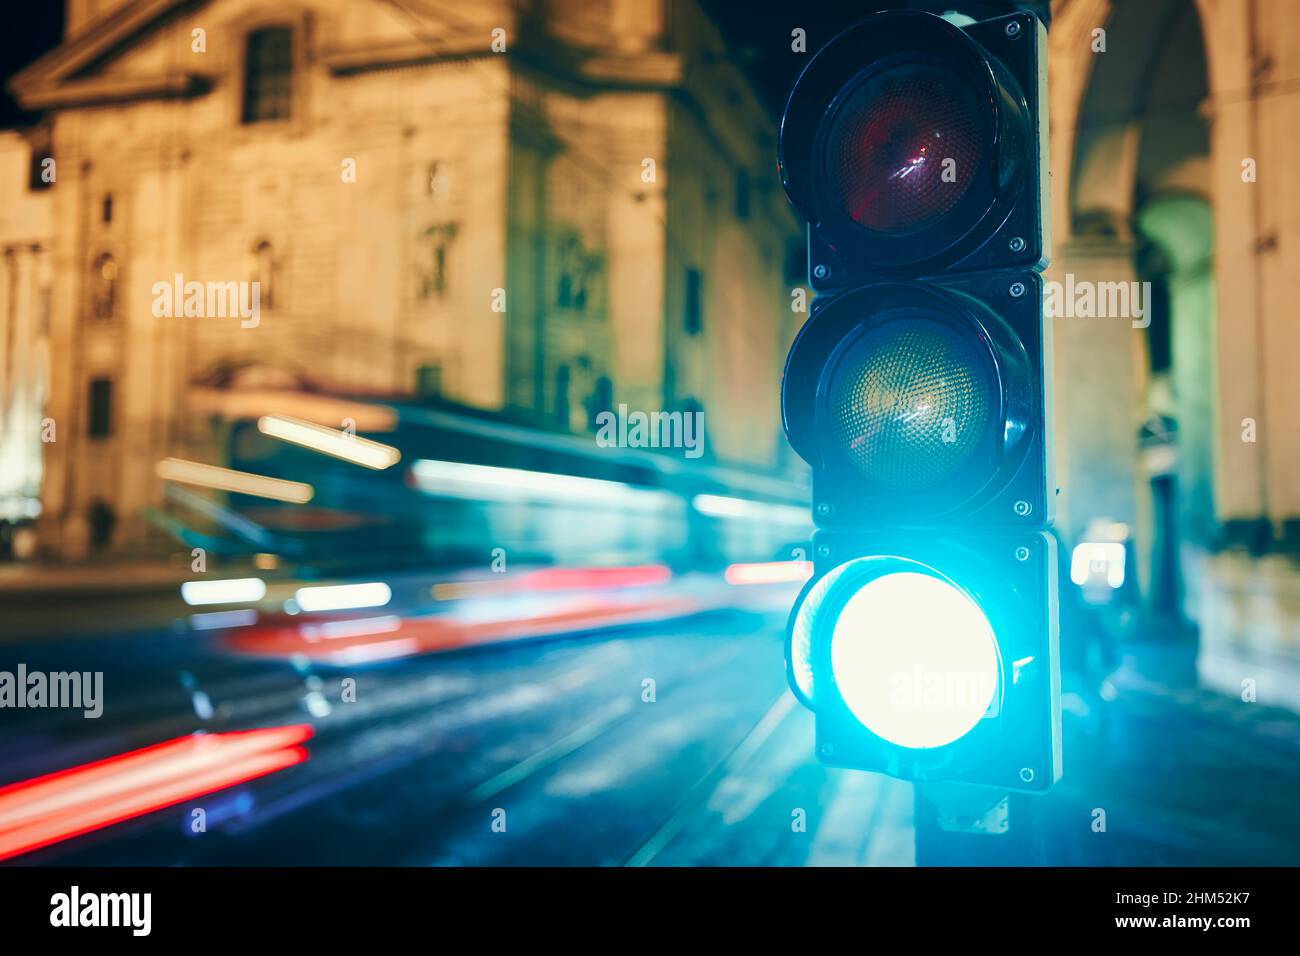 Green on traffic light against tram and cars in blurred motion. Night scene of city street in Prague, Czech Republic. Stock Photo